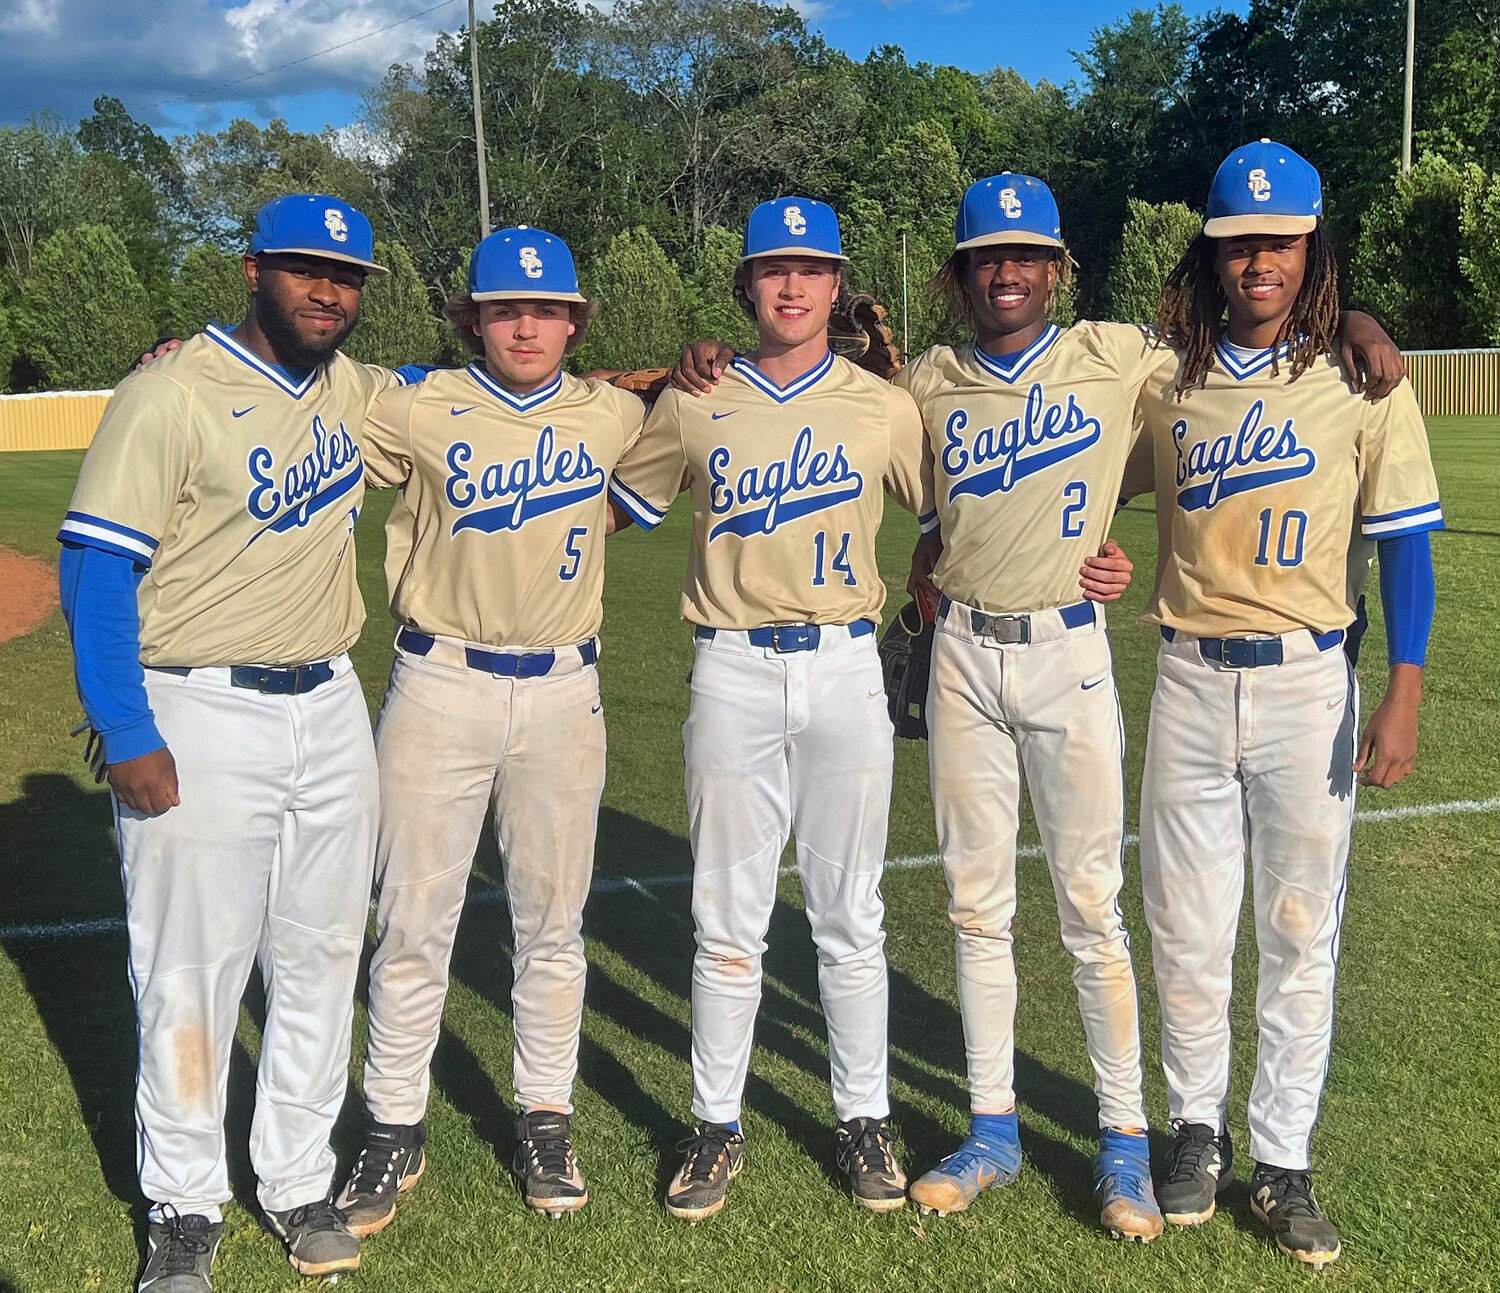 It was Senior Night on Monday in Shelbyville Central’s contest against Lawerence County. Seniors honored are (from left) Ahmad Coats, Caden Thomas, Caleb Molder, Marquis Wilson and Jaquai Beverly.